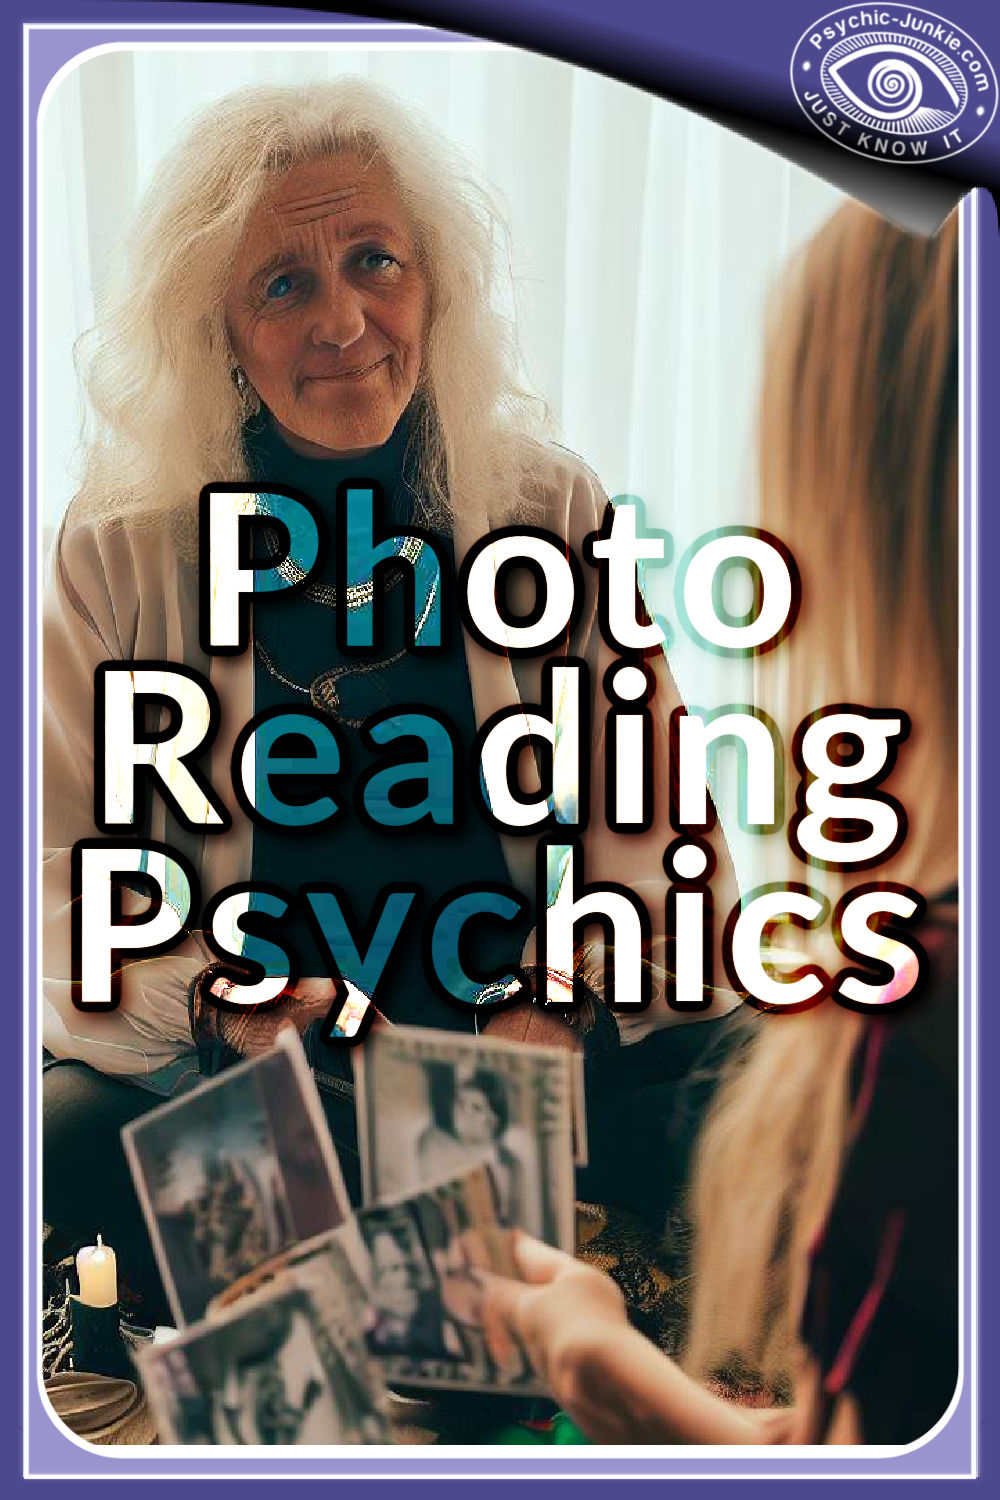 What is the psychic ability to read photos?